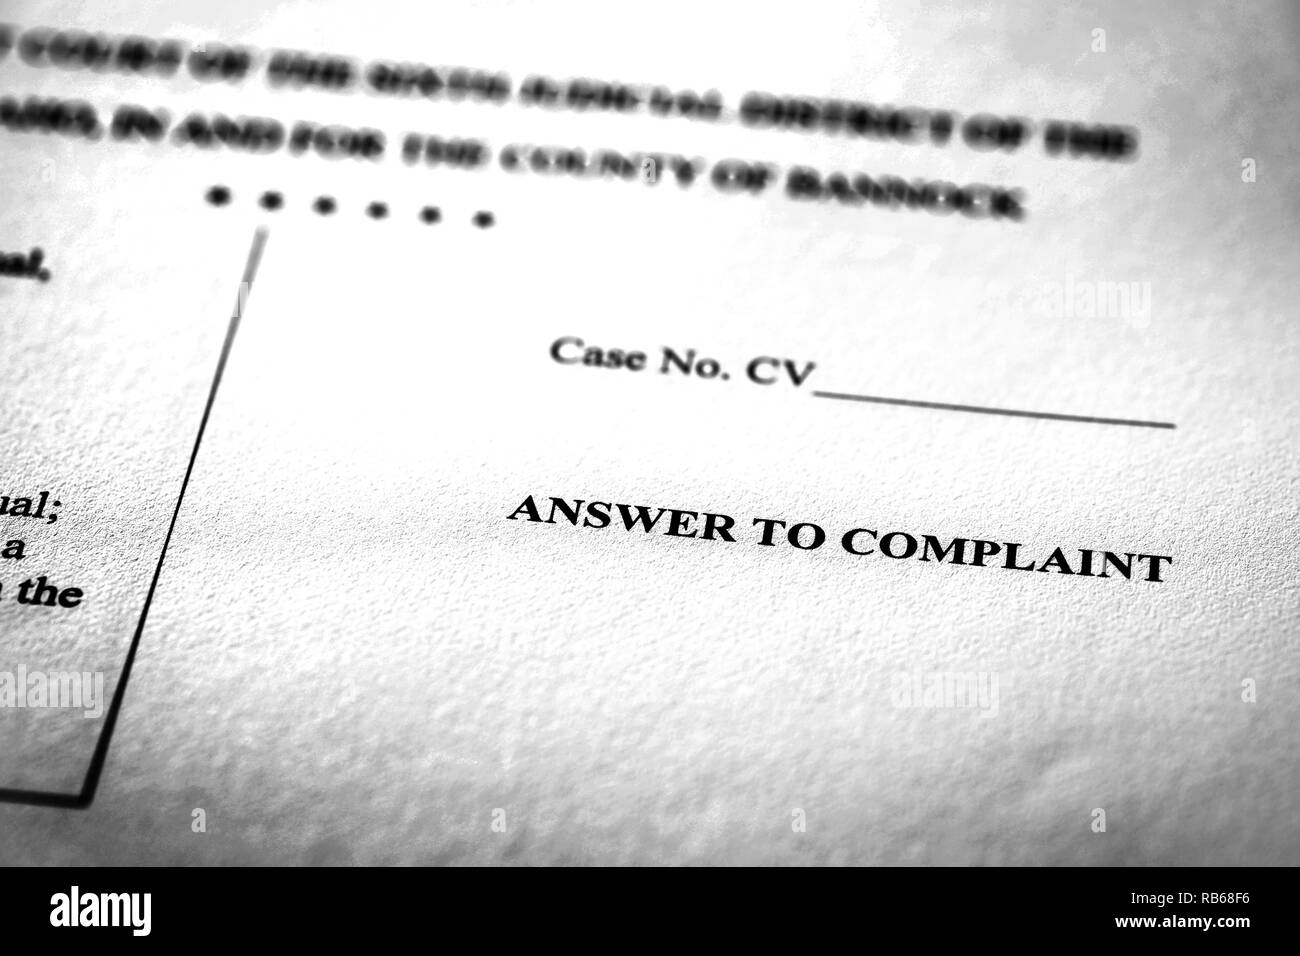 Legal Pleadings Court Papers Law Anser to Complaint Stock Photo